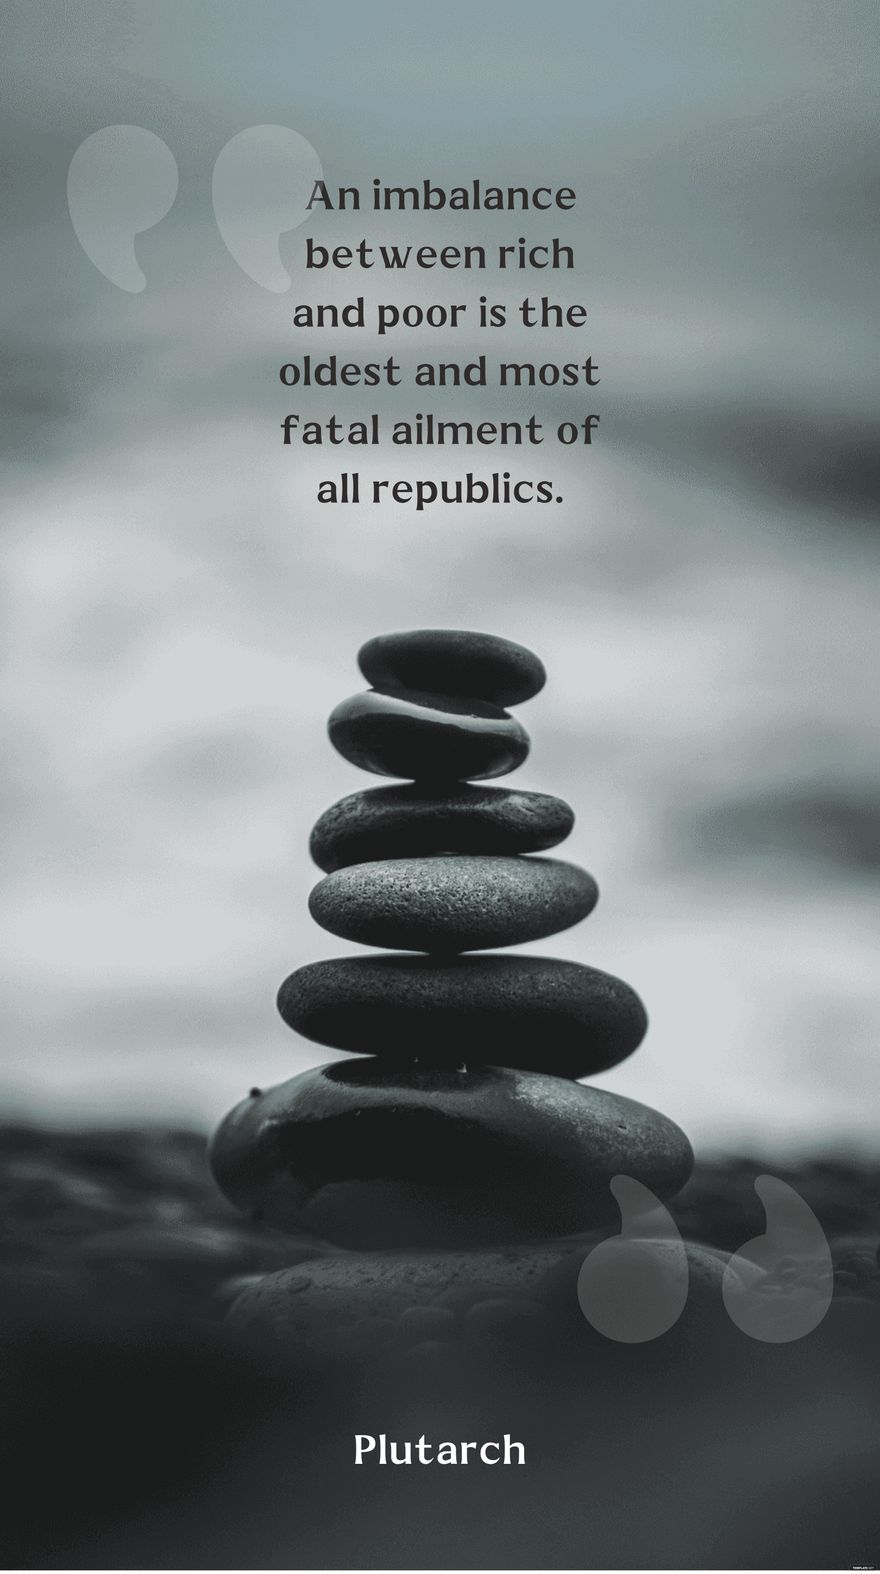 An imbalance between rich and poor is the oldest and most fatal ailment of all republics. - Plutarch in JPEG